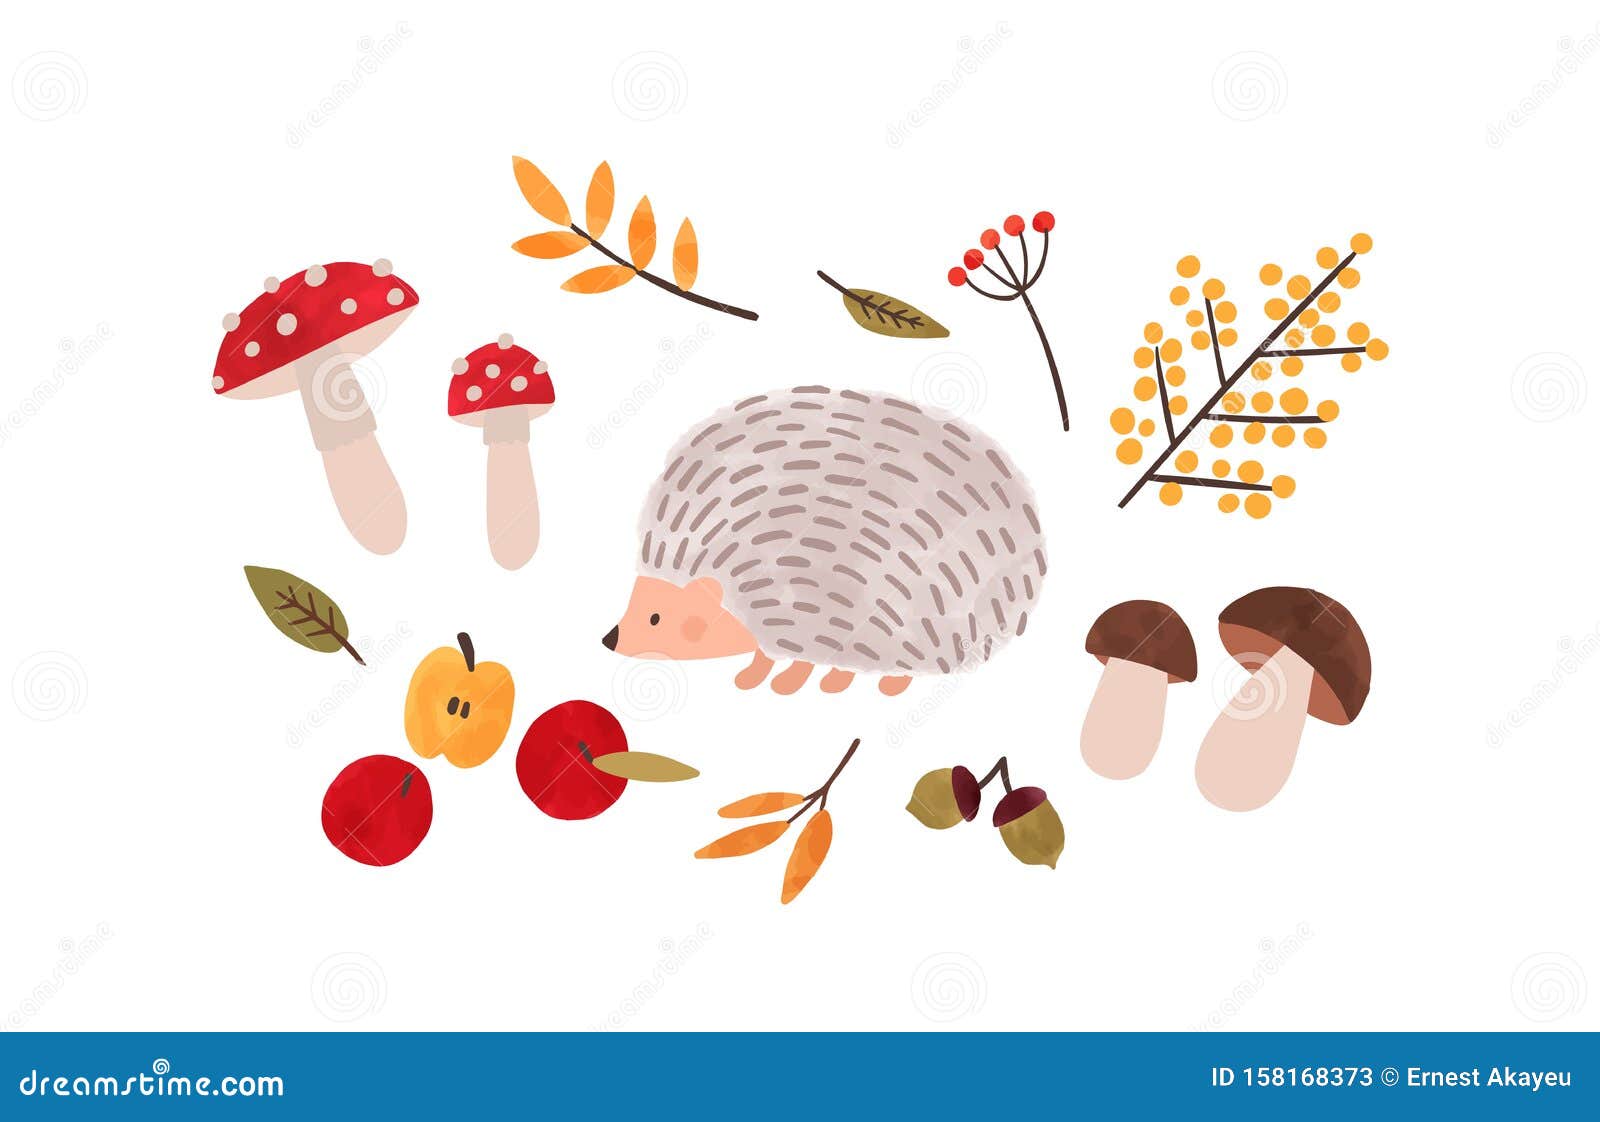 Forest Flora and Fauna Hand Drawn Vector Illustration. Autumn Season  Symbols Watercolor Painting Stock Vector - Illustration of composition,  berries: 158168373